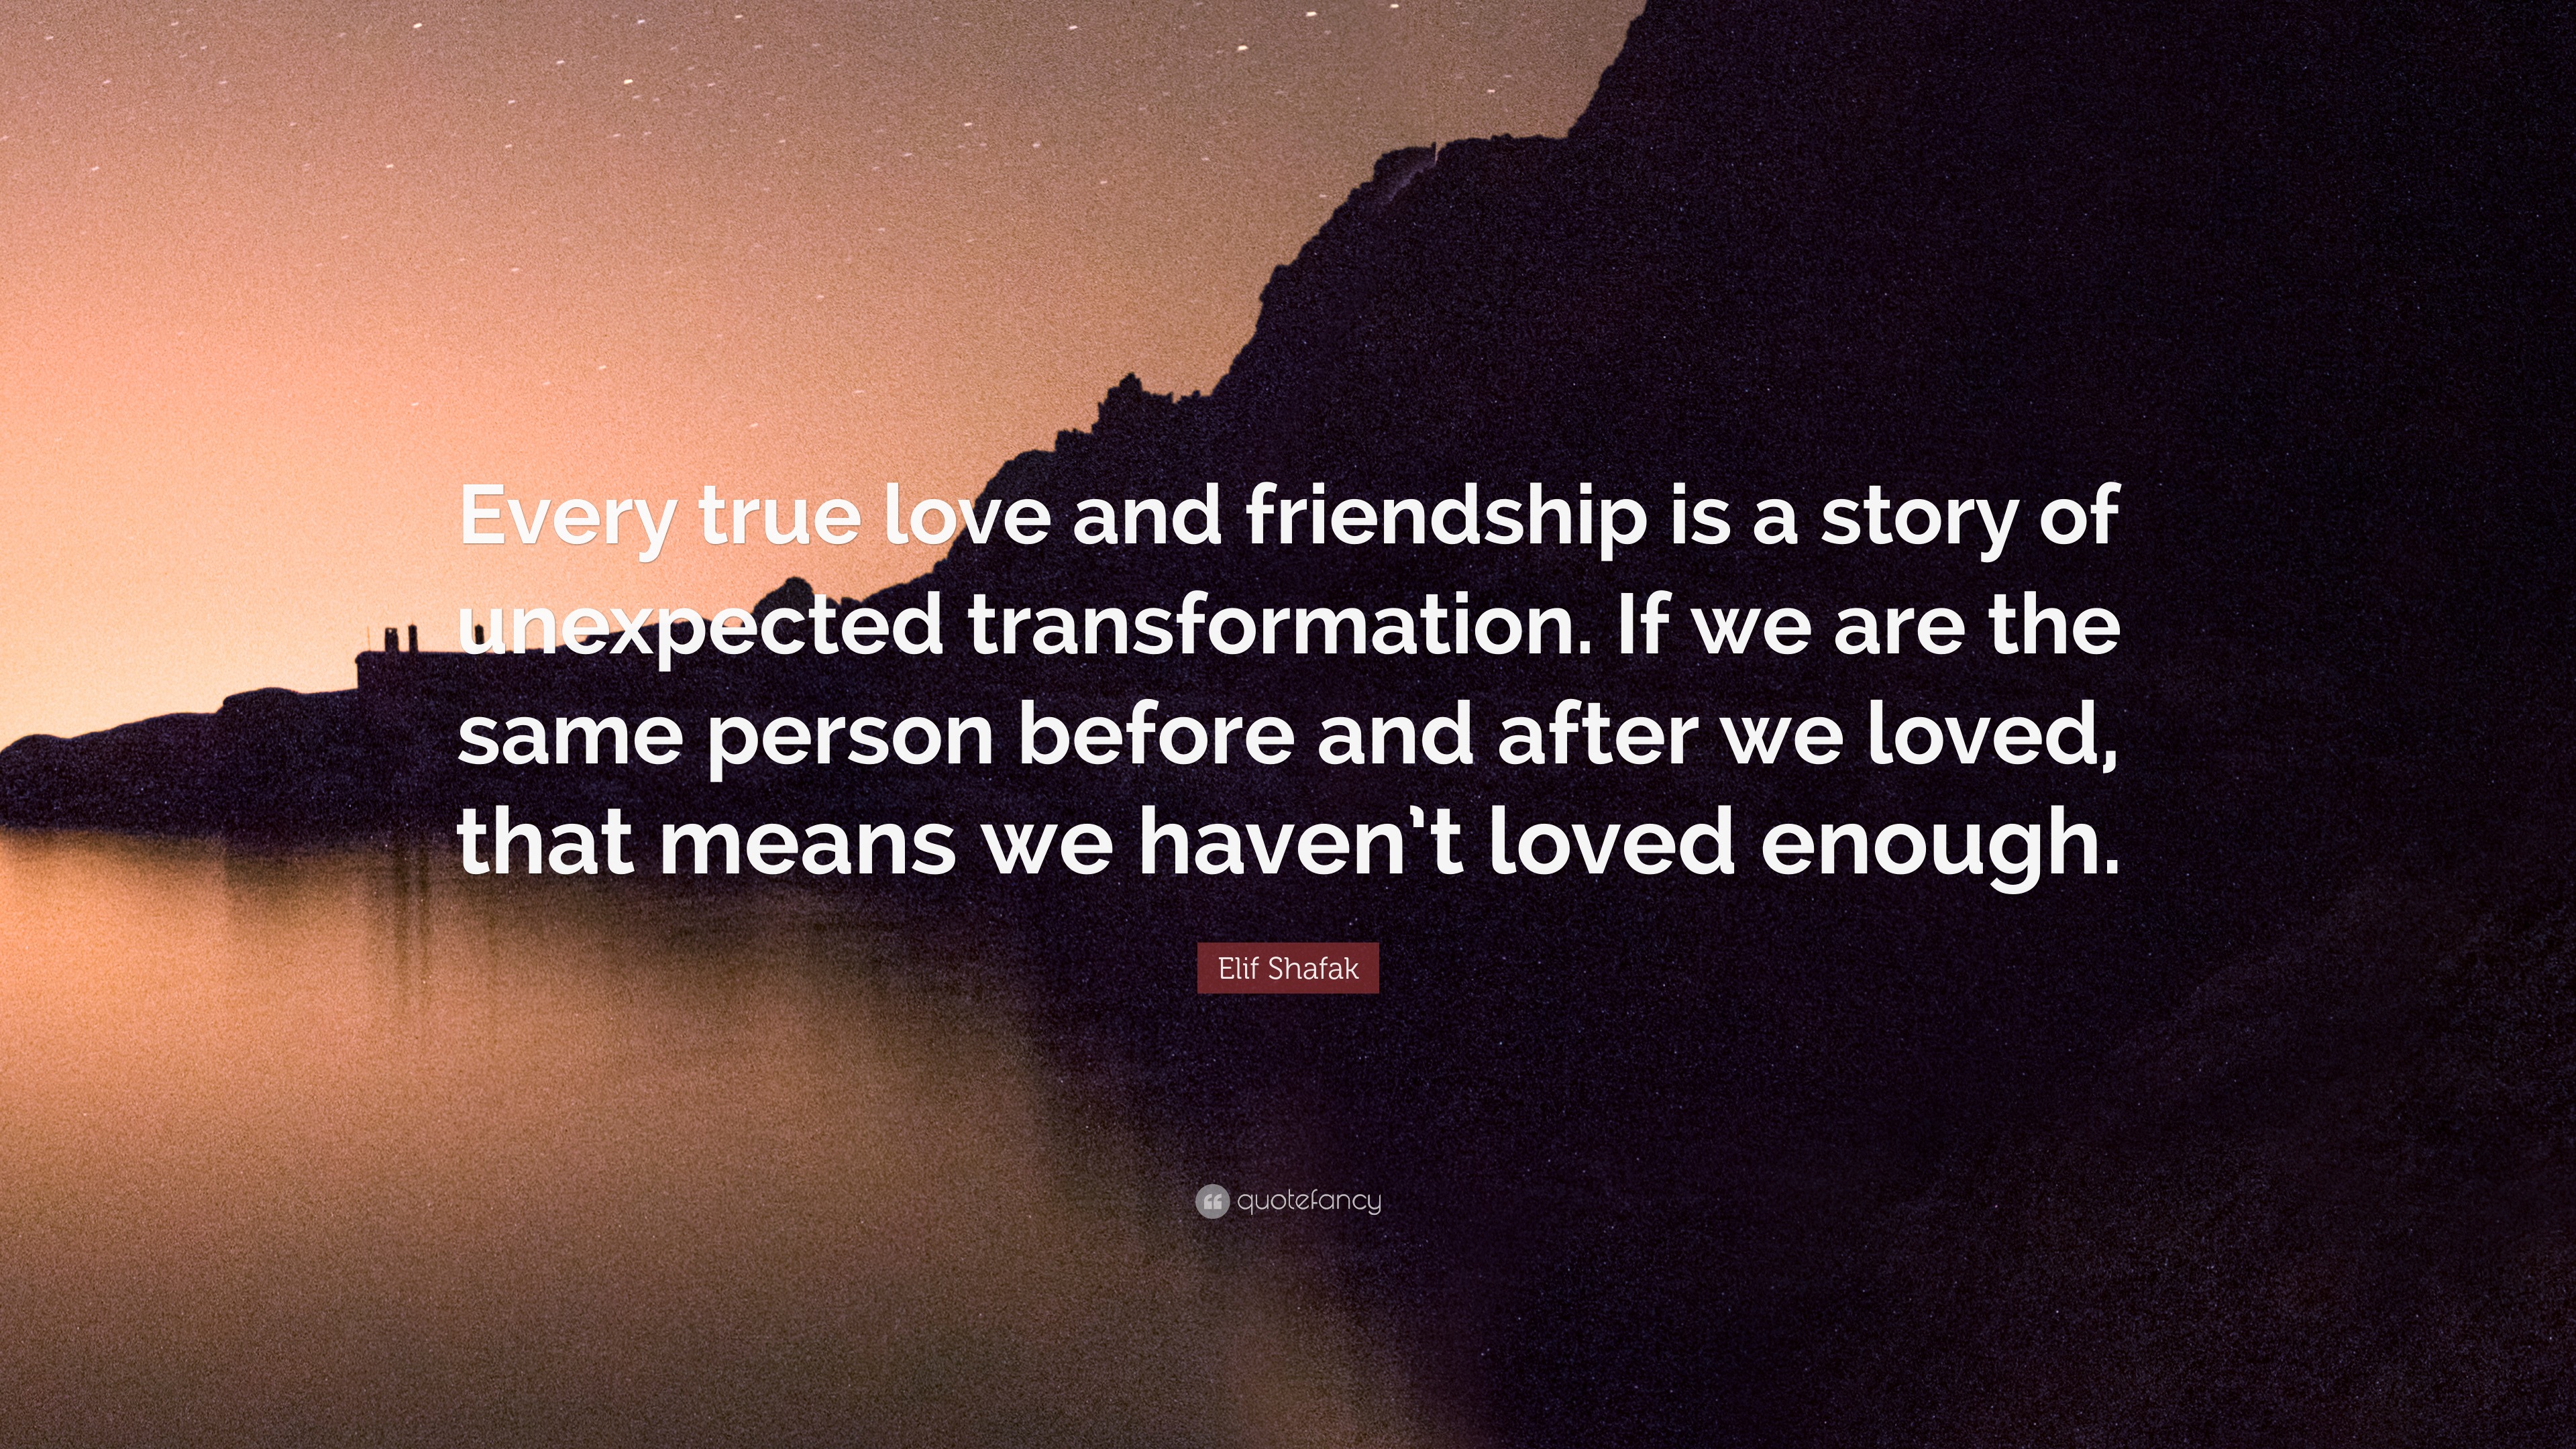 Elif Shafak Quote “Every true love and friendship is a